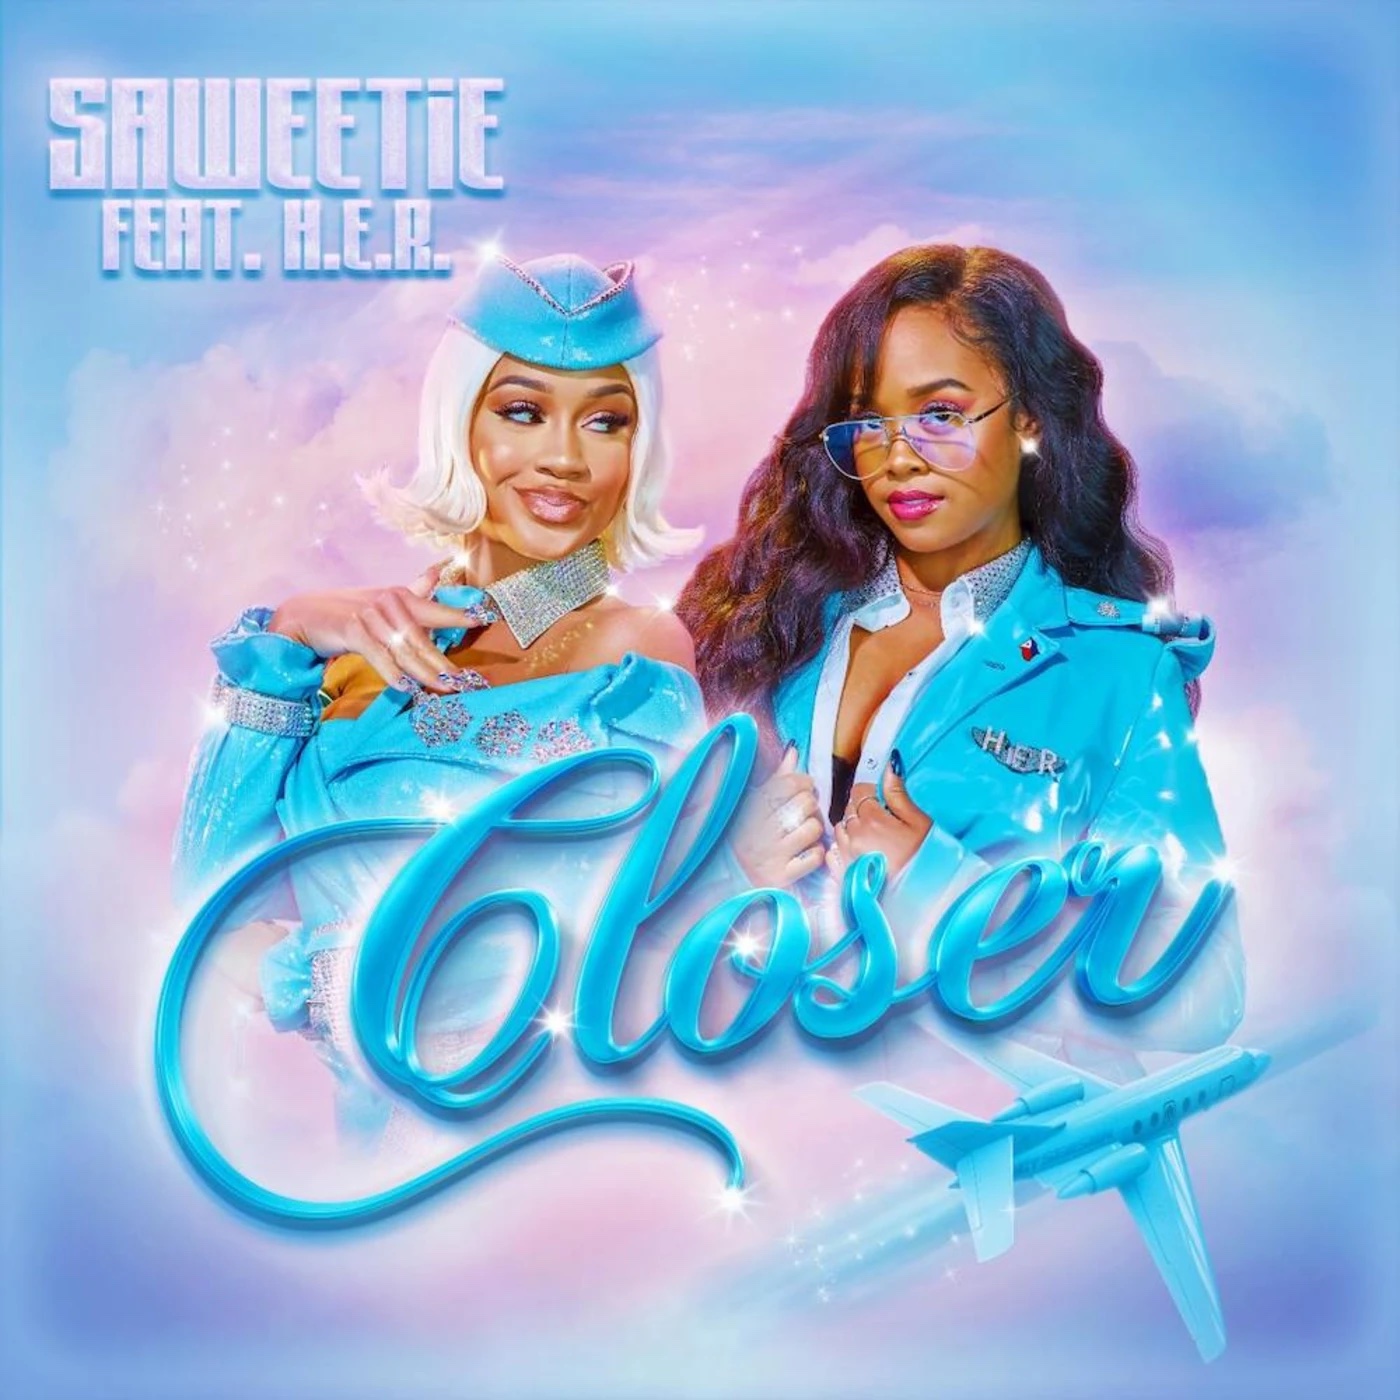 Saweetie ft. featuring H.E.R. Closer cover artwork